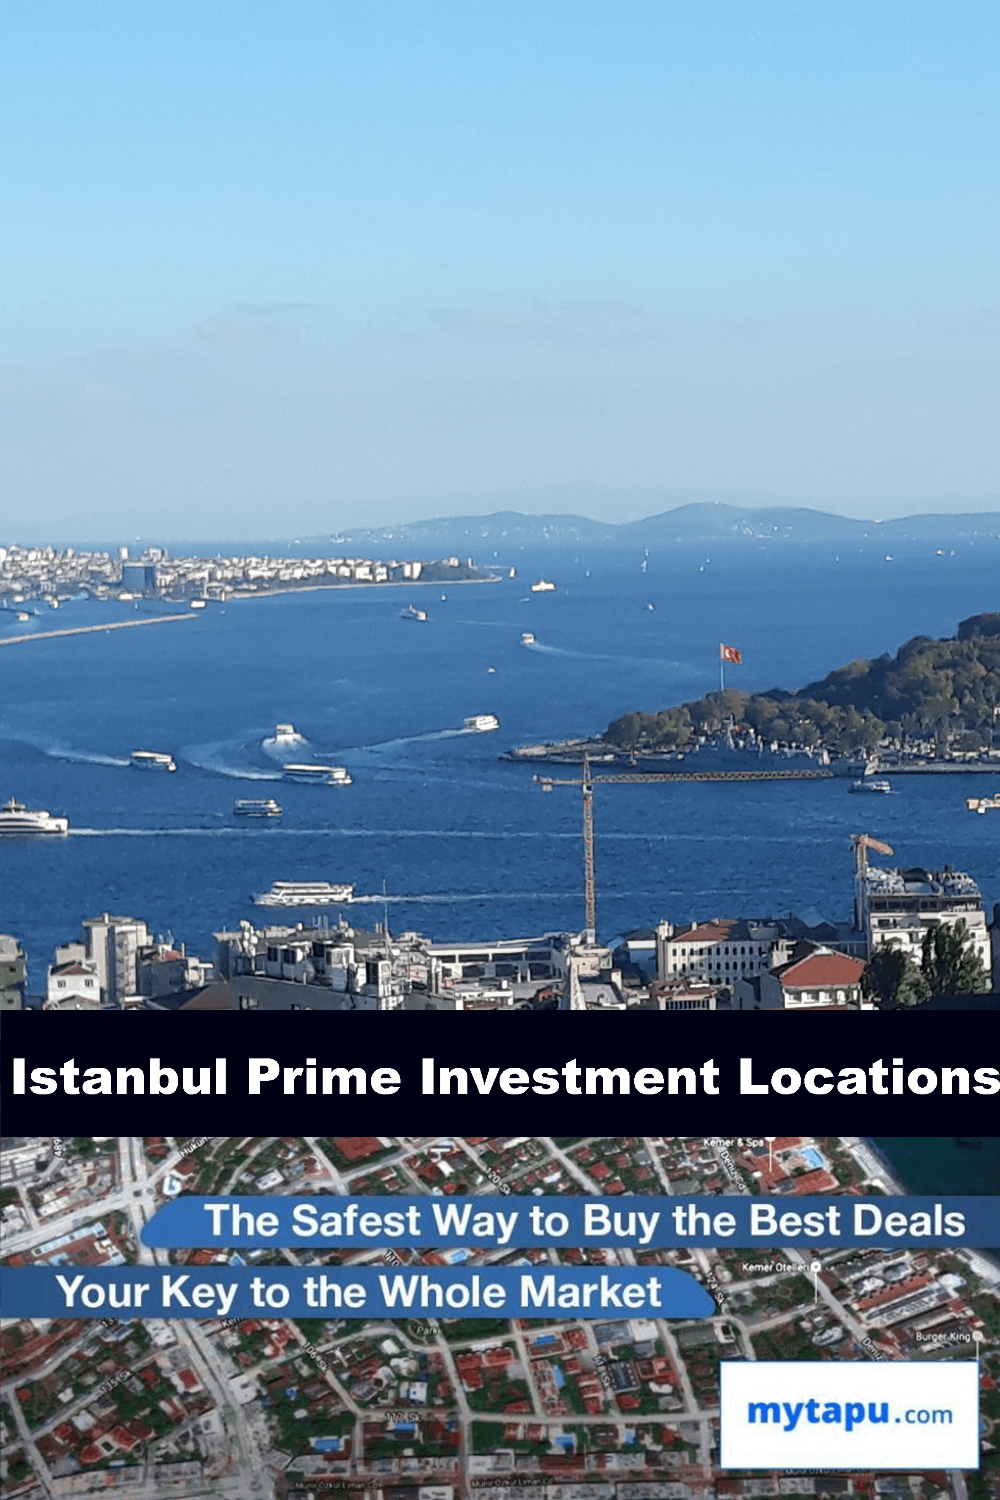 Property for Investment in Prime Central Istanbul Locations